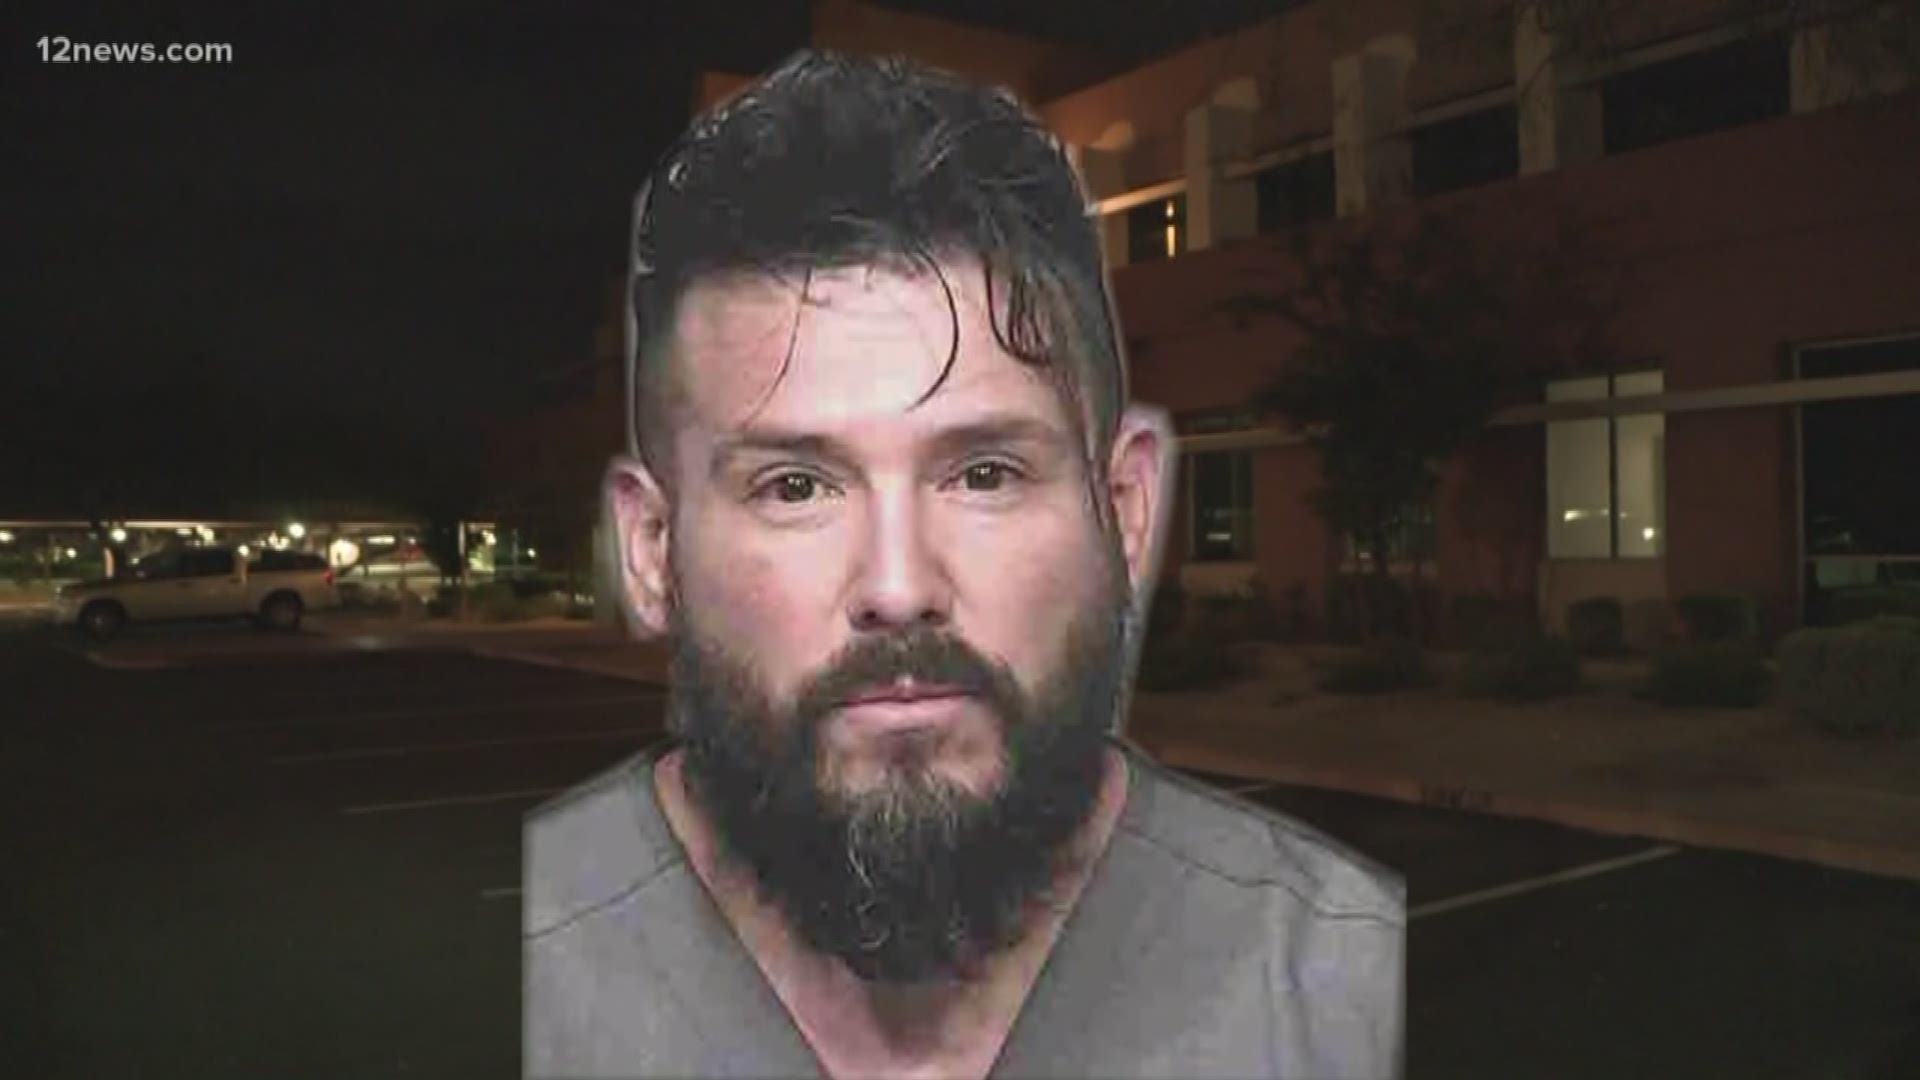 A medical worker at a north Scottsdale pain treatment center was arrested Wednesday on charges of sexual assault. Police said the pain treatment center has several Valley locations where the suspect worked, and detectives are concerned there may be other victims.